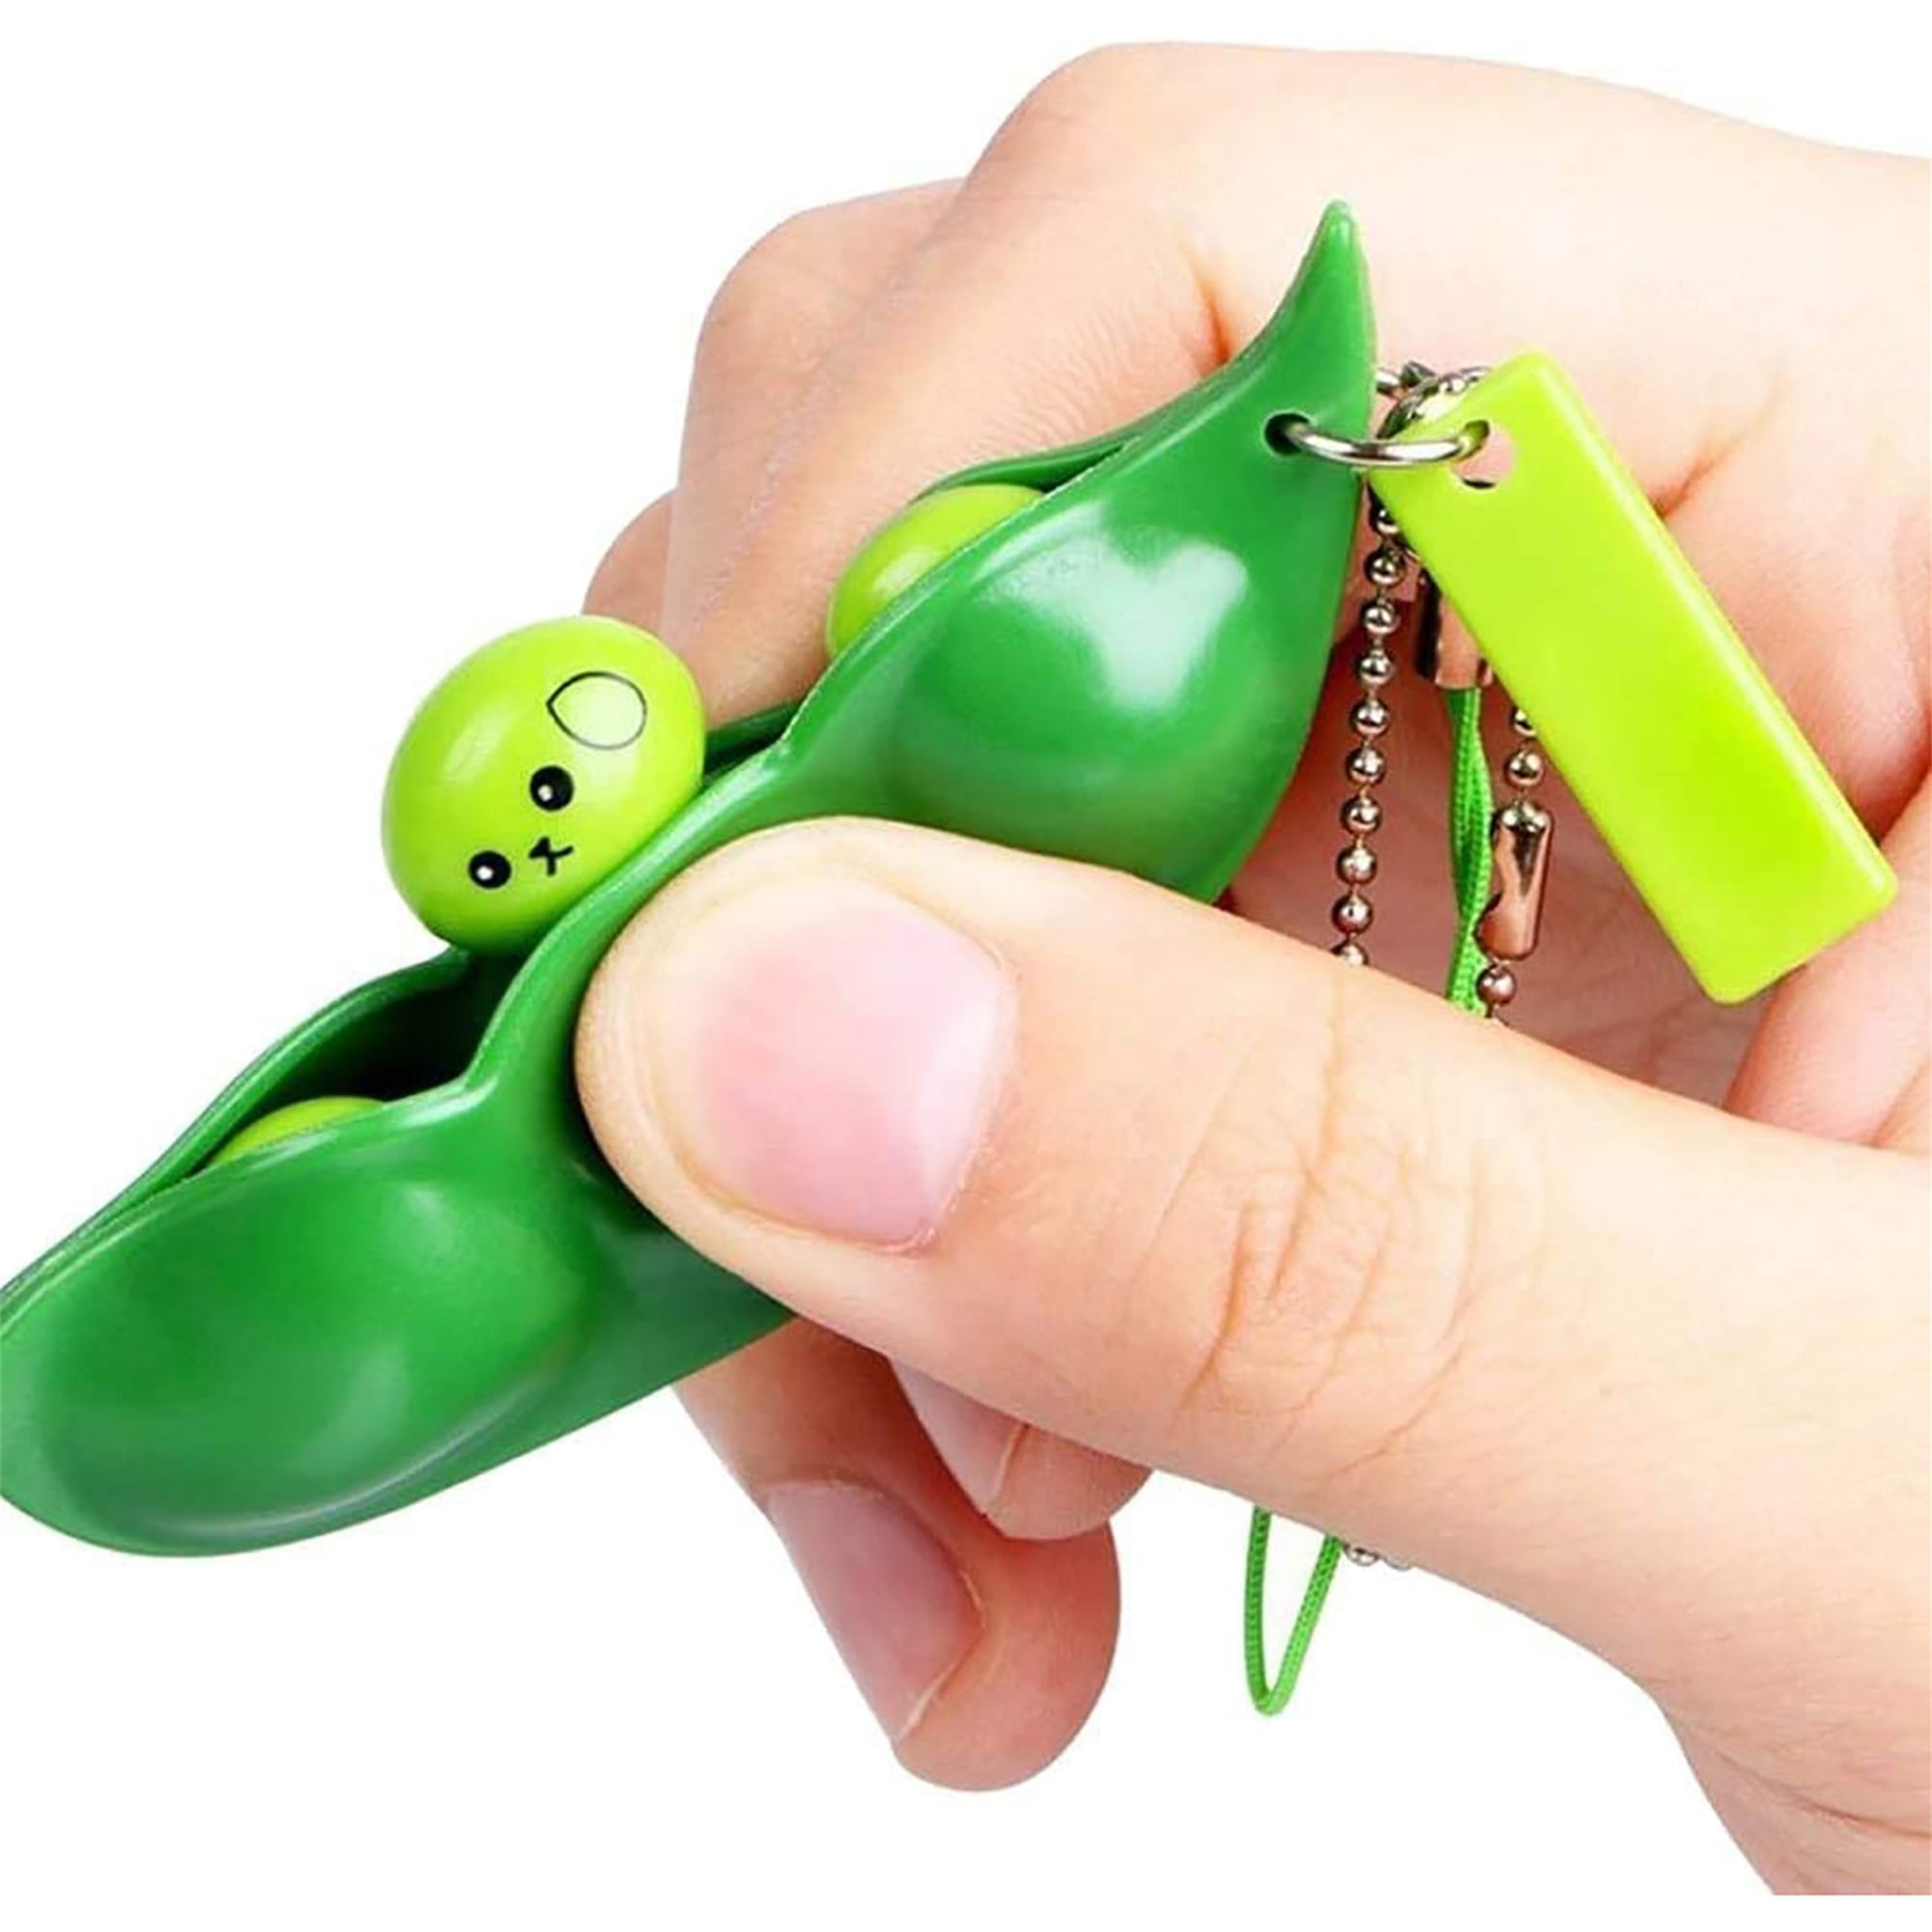 GREEN SOY BEAN SHAPE STRESS RELIEF DECOMPRESSION ADULT TOY KEYCHAIN PENDANT SMAR 